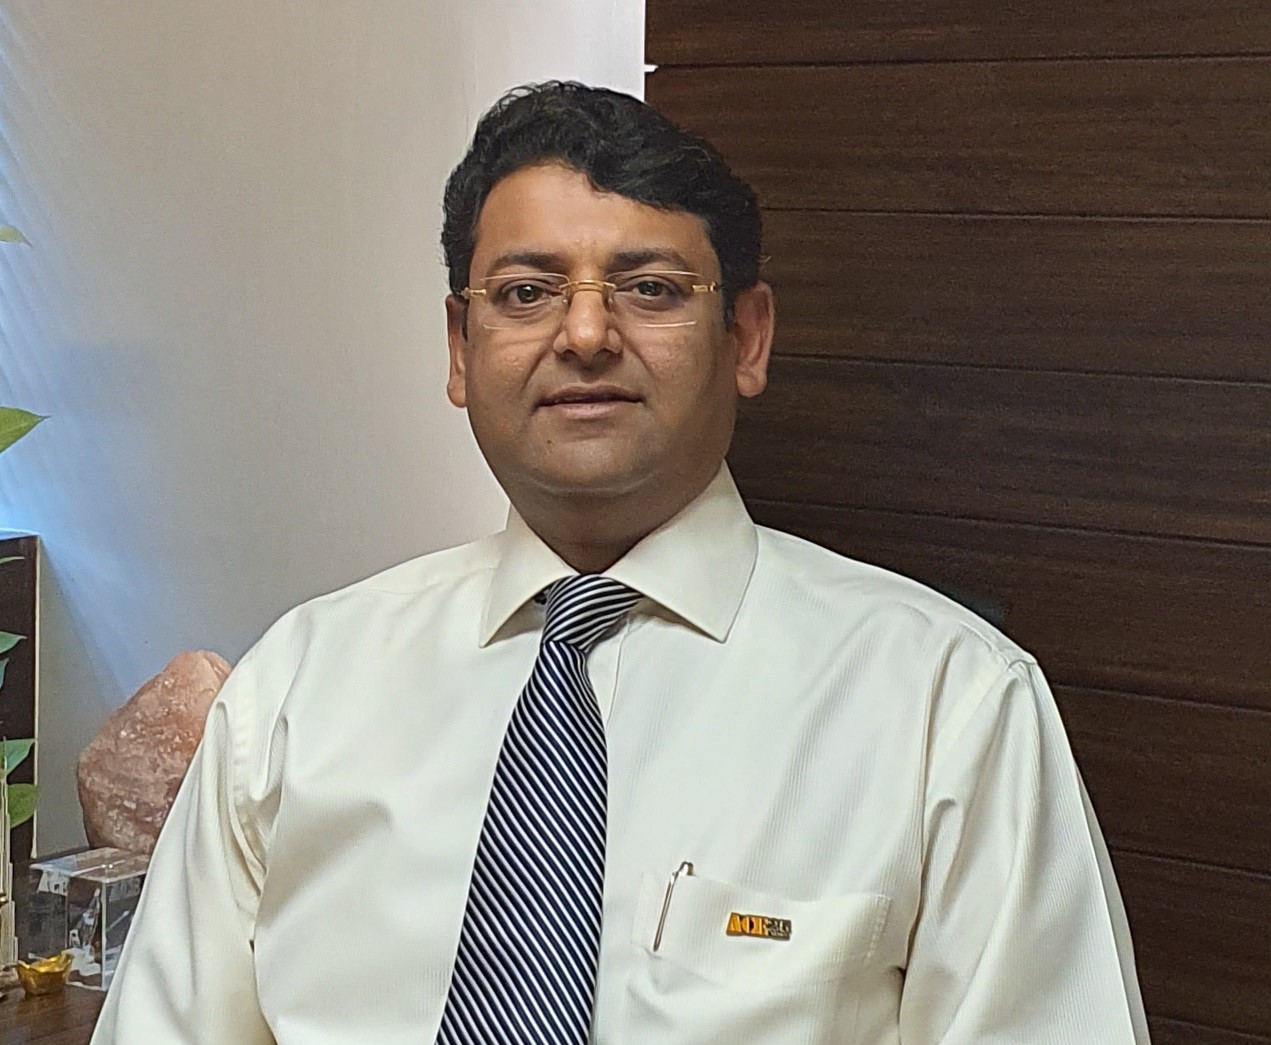 Demand for road equipment will be huge, says Sorab Agarwal, Executive Director, ACE